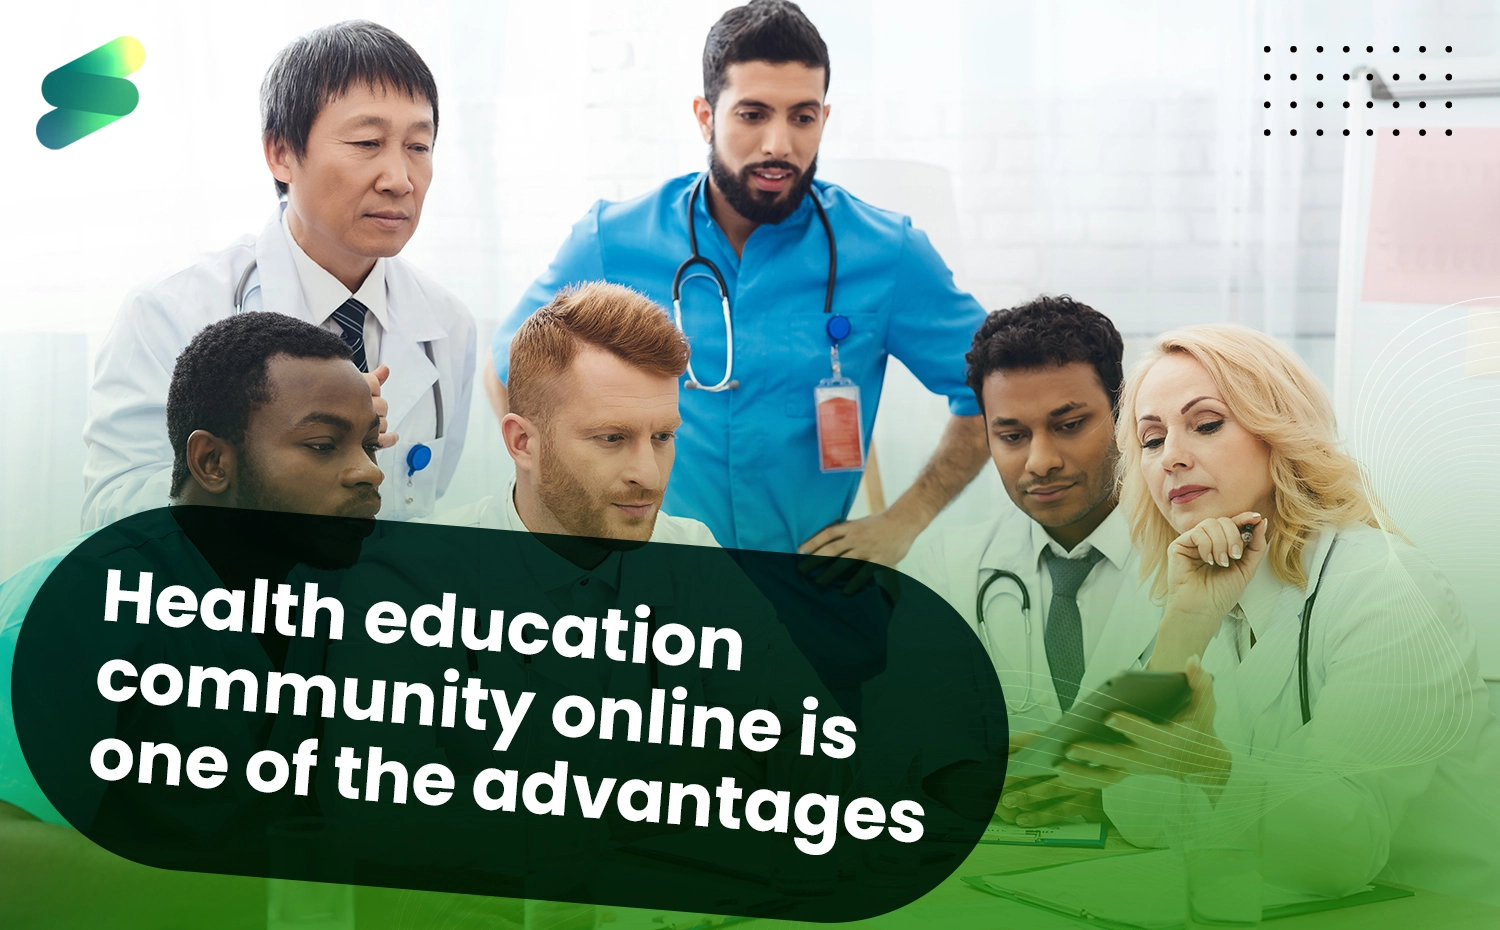 Health education community online is one of the advantages